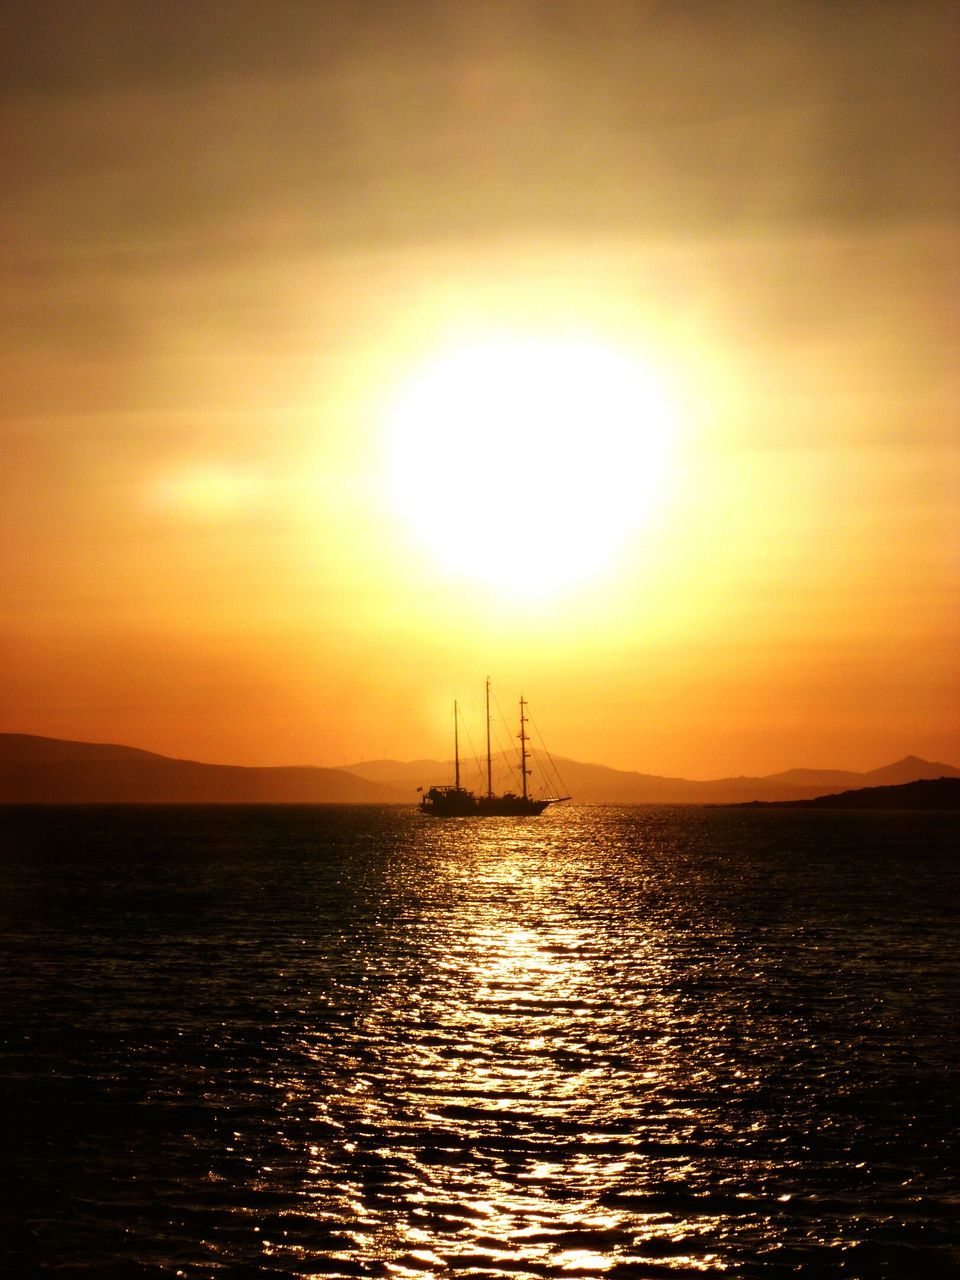 sunset, sea, water, sun, waterfront, scenics, tranquil scene, orange color, tranquility, beauty in nature, silhouette, rippled, nature, sky, horizon over water, idyllic, nautical vessel, sailboat, transportation, boat